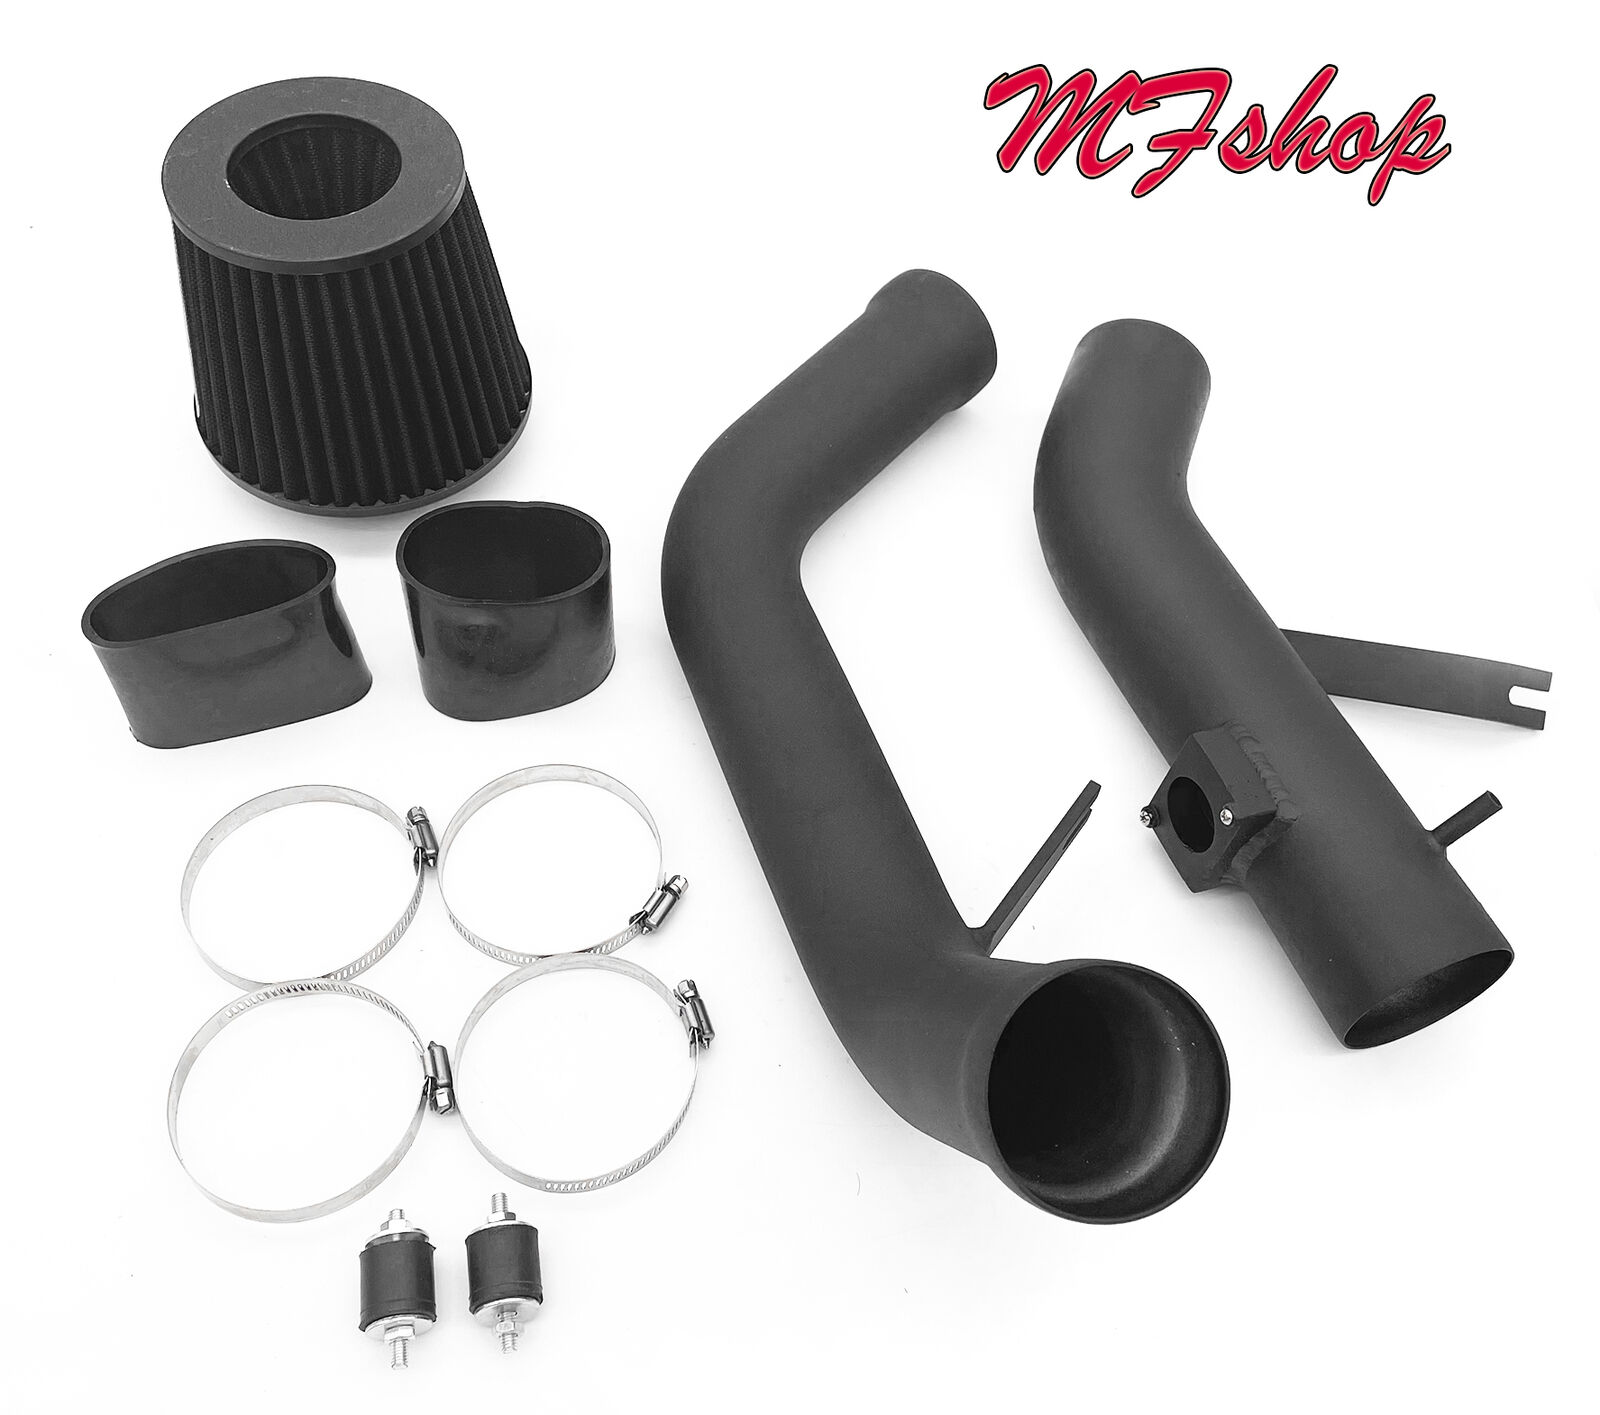 Coated Black 2PC Cold Air Intake Kit For 2006-2011 Mitsubishi Eclipse 3.8L V6